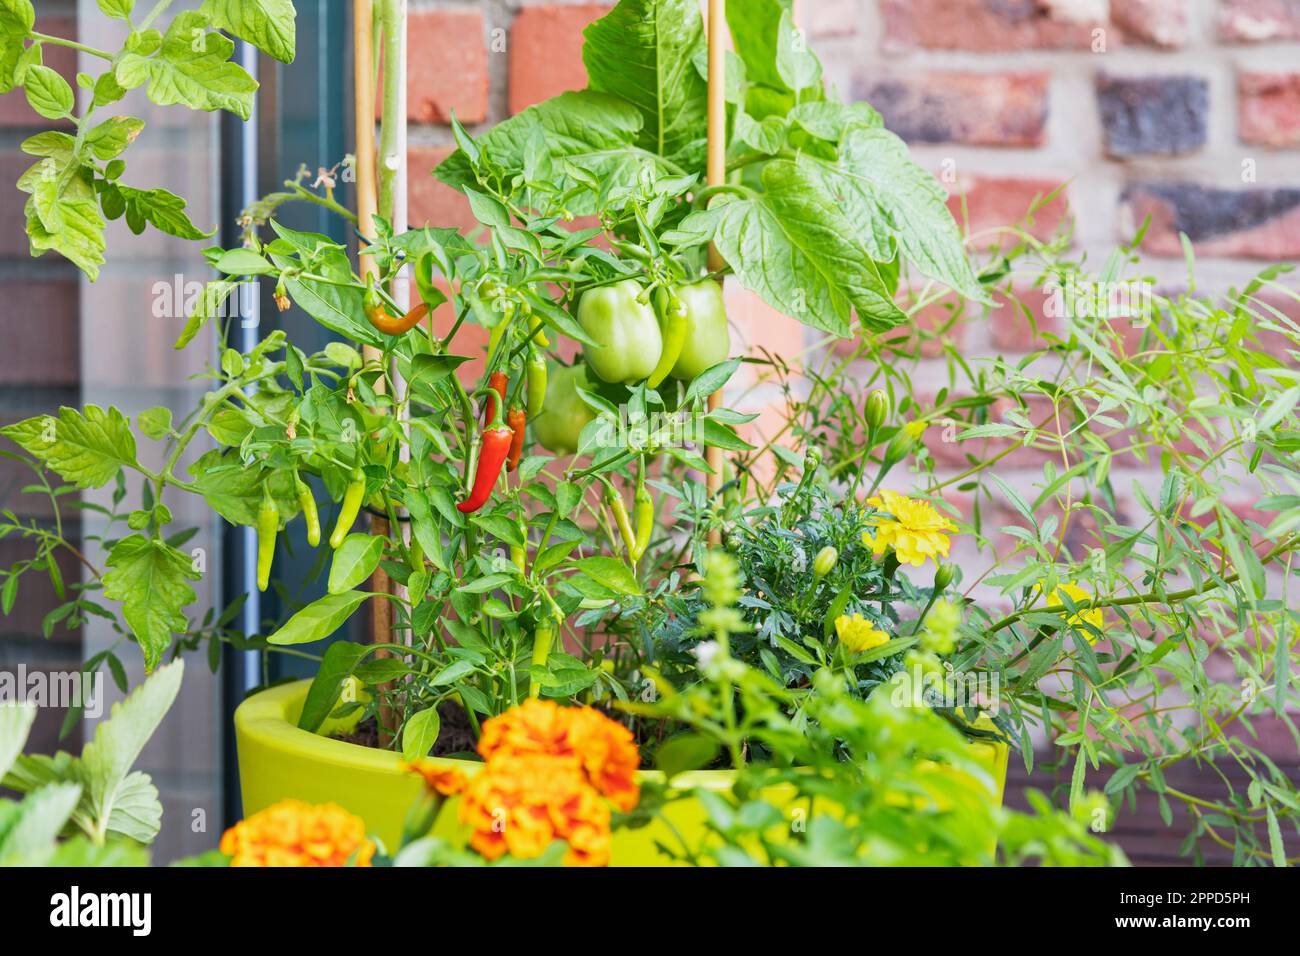 Tomatoes and red chili peppers cultivated in balcony garden Stock Photo